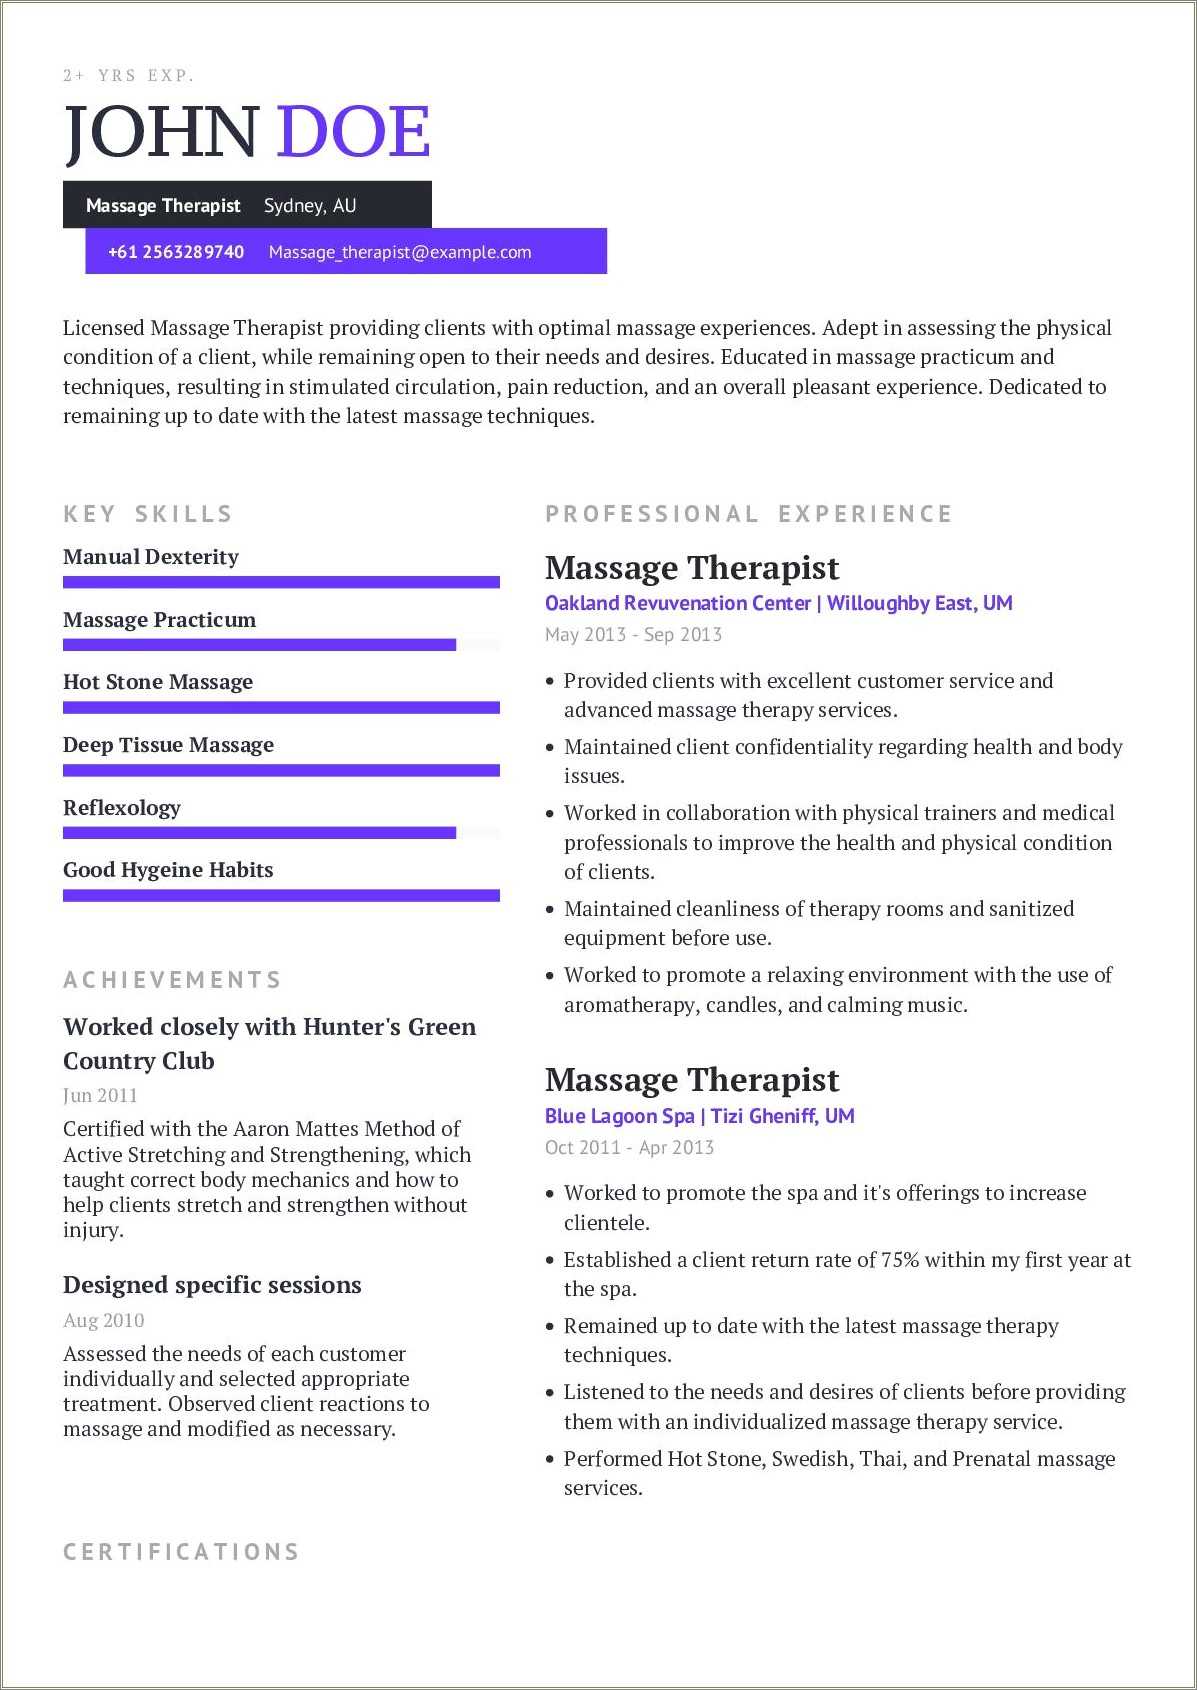 New Massage Therapist Resume Examples - Resume Example Gallery